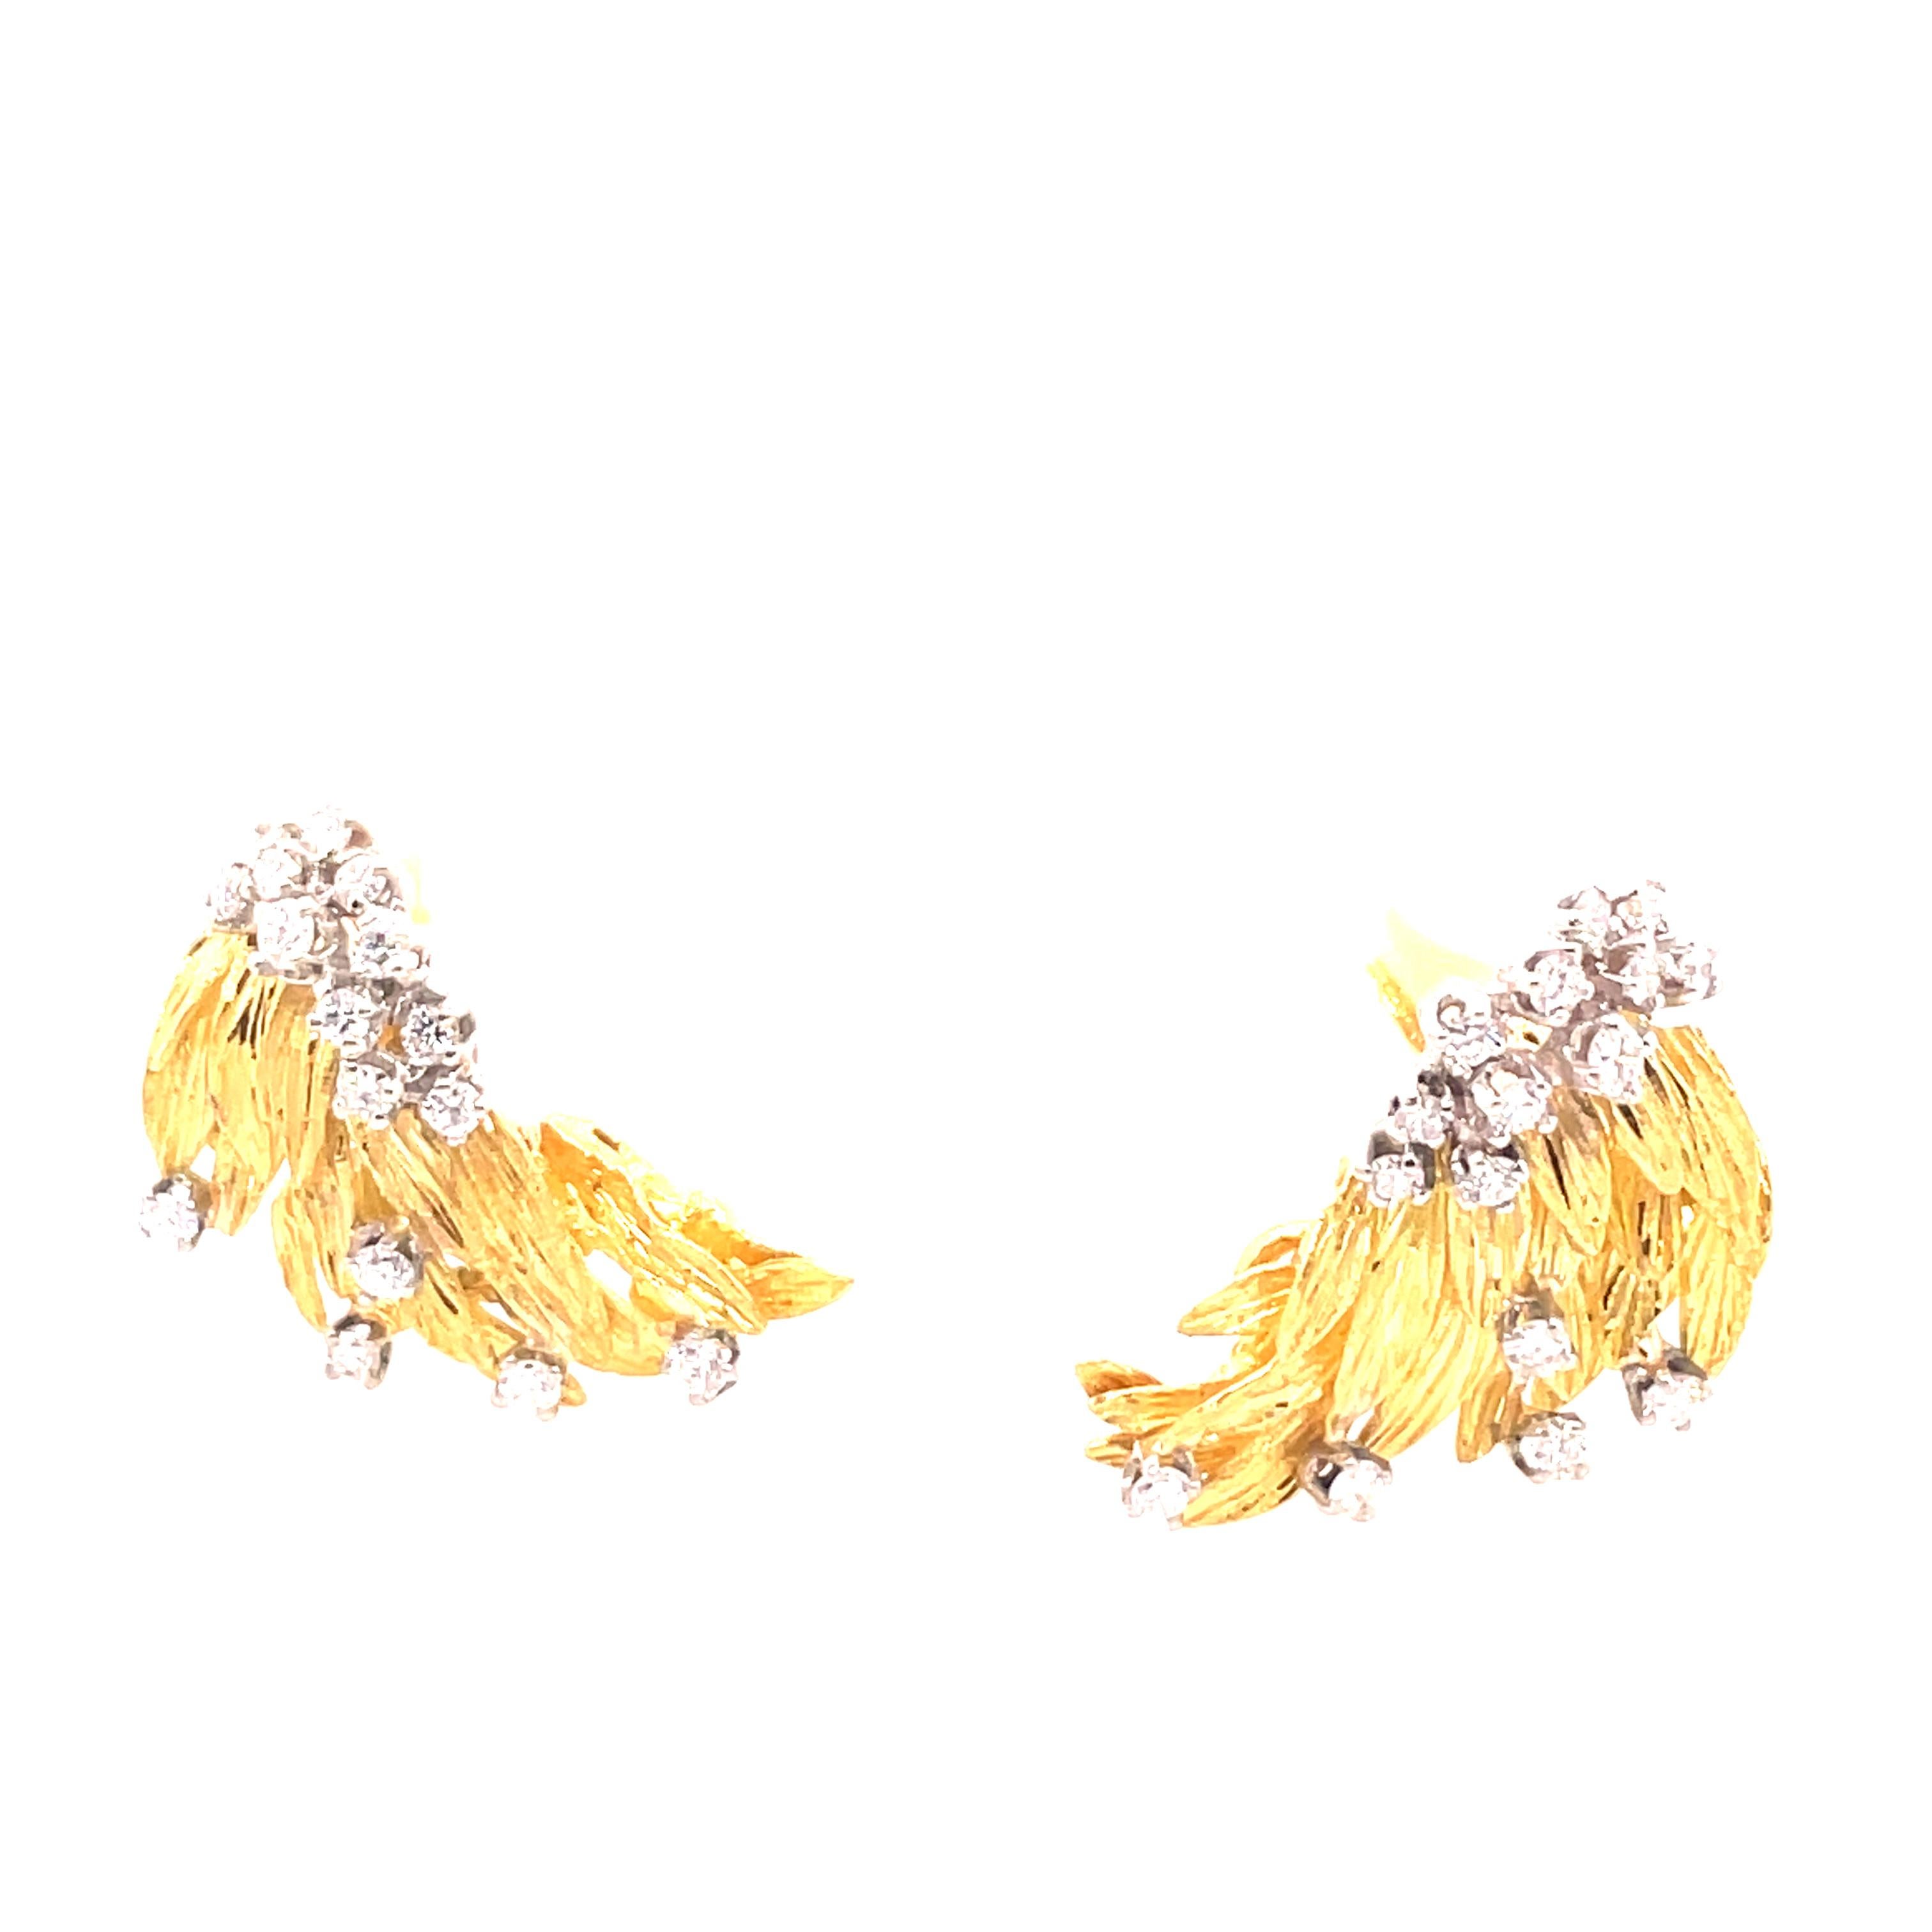 18kt yellow gold earrings with gorgeous diamonds scattered through out with omega backs.
These earrings sit perfectly on the ear and the diamonds sparkle in the light. 
Great day to evening choice.